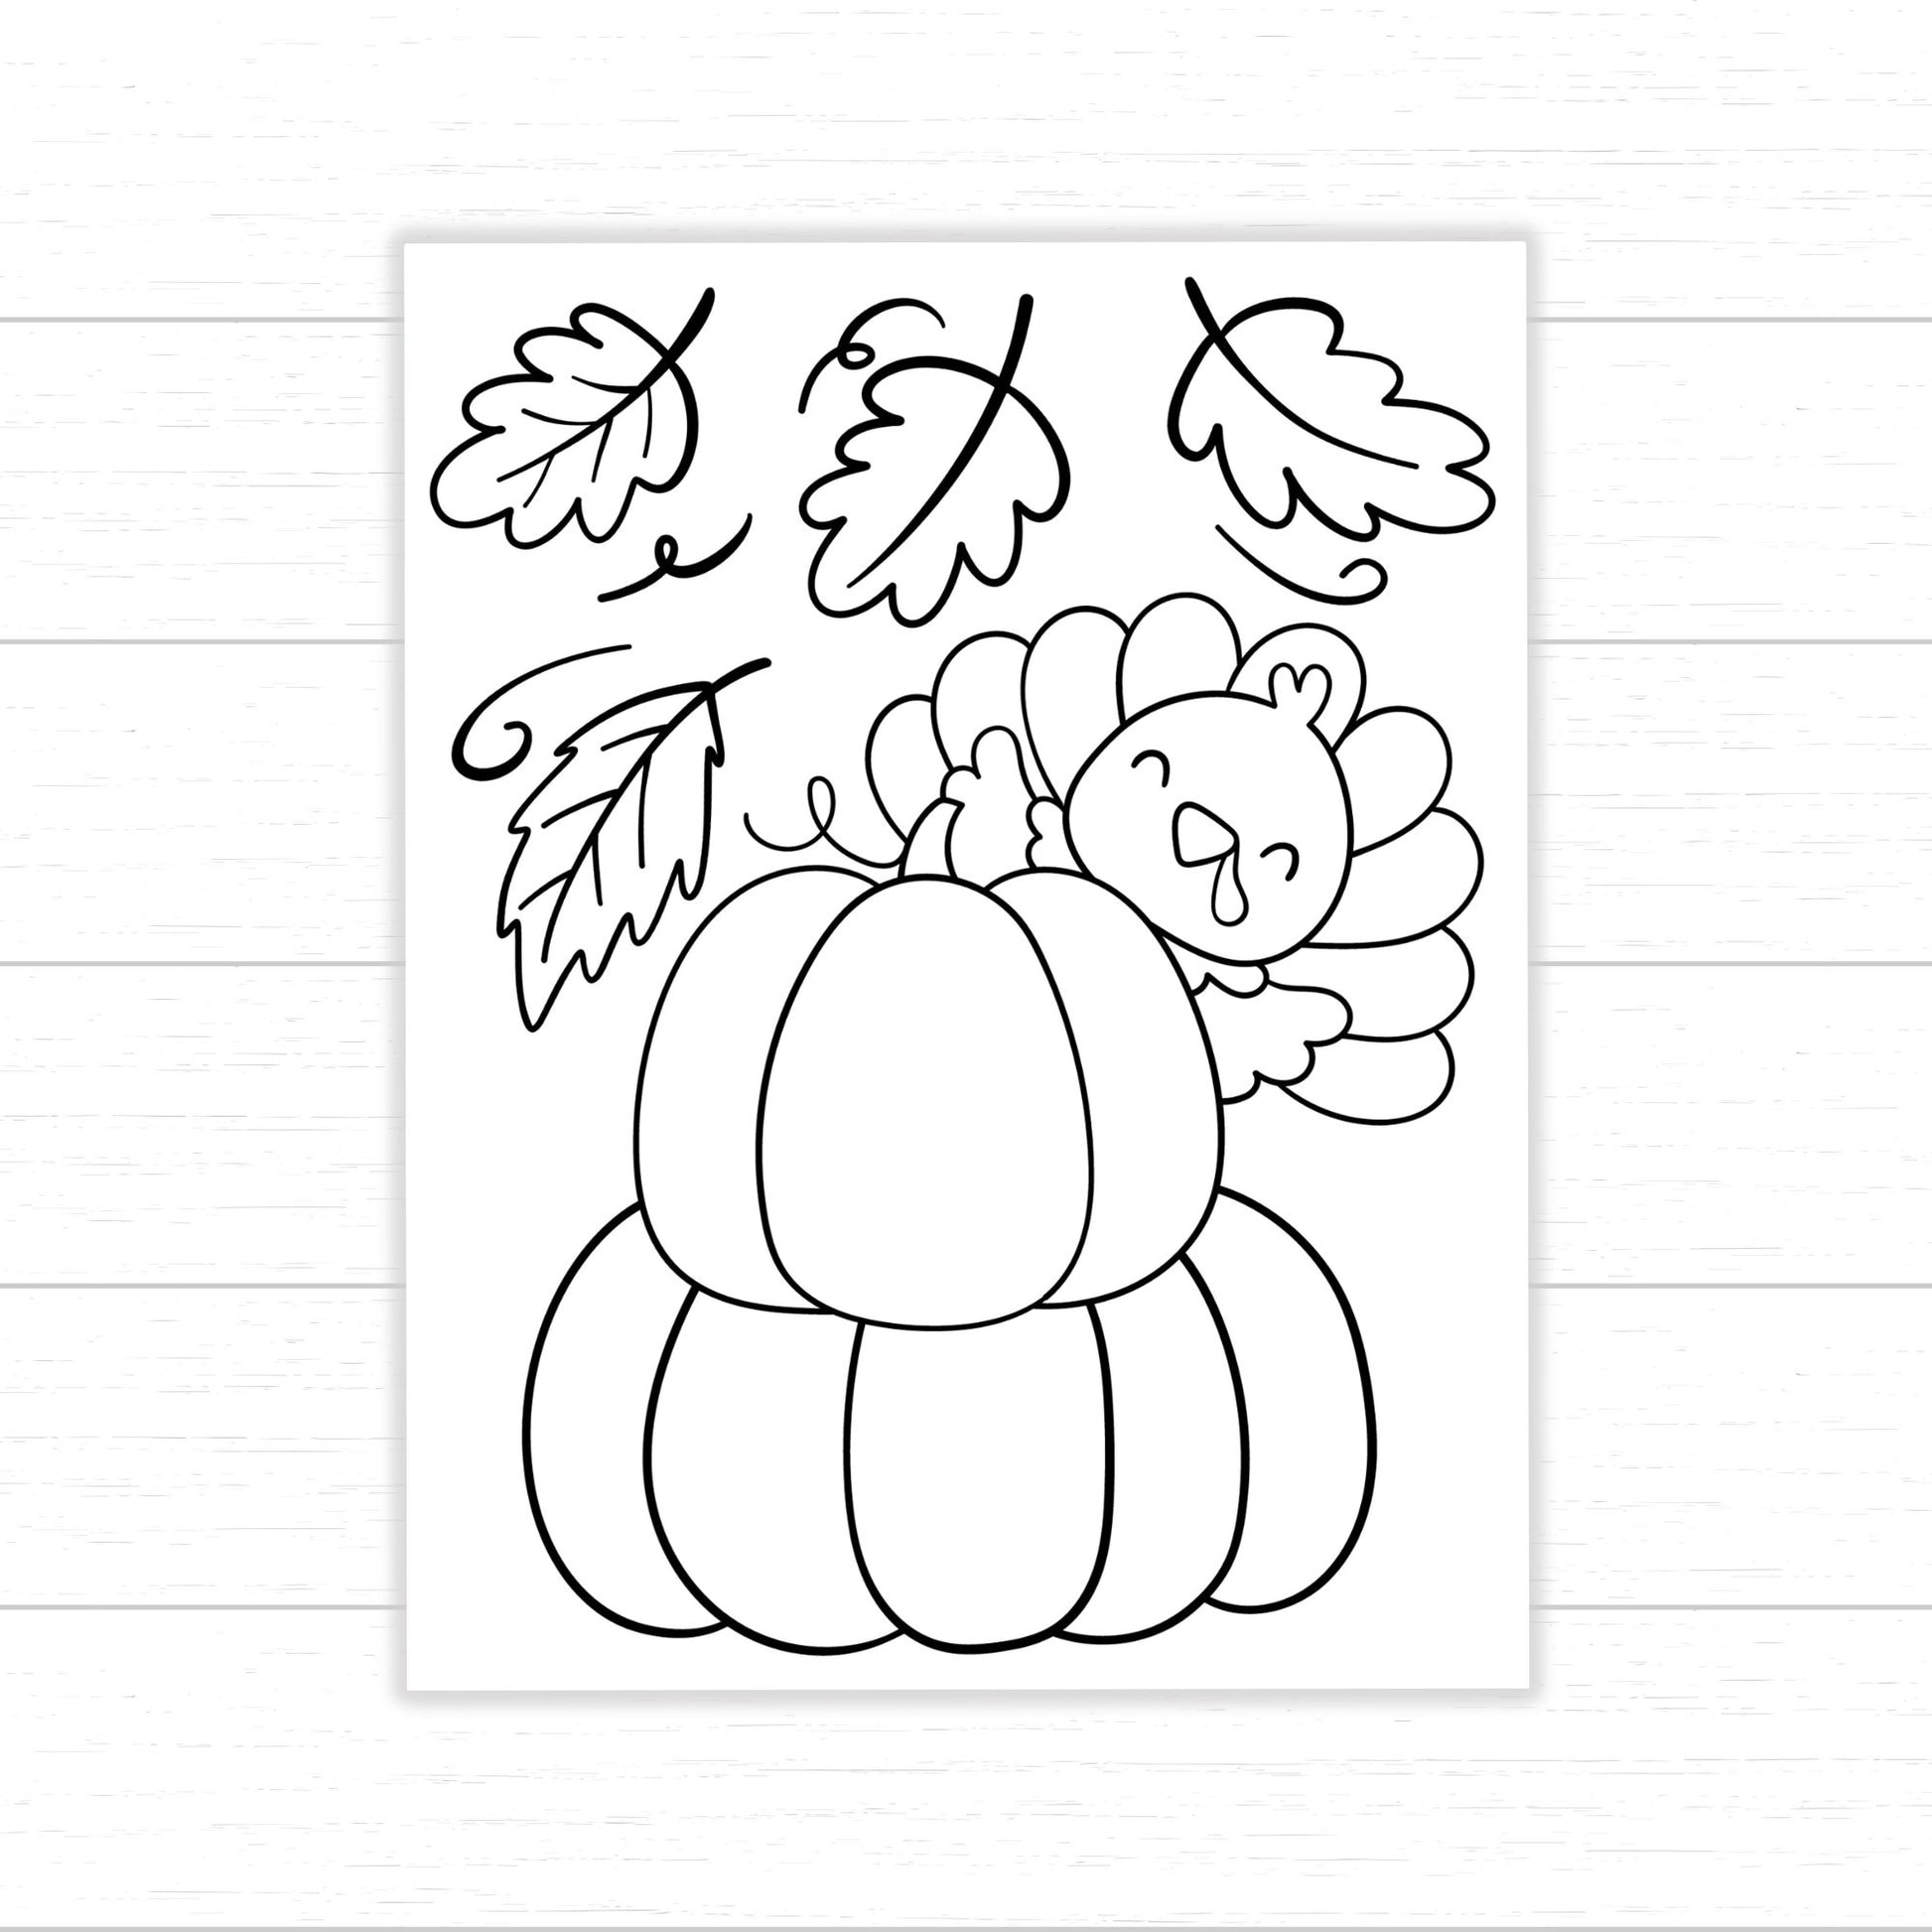 Cute Turkey Coloring Pages, Printable Turkey Coloring Pages for Kids, Printable Thanksgiving Coloring Pages, Turkey Coloring Book